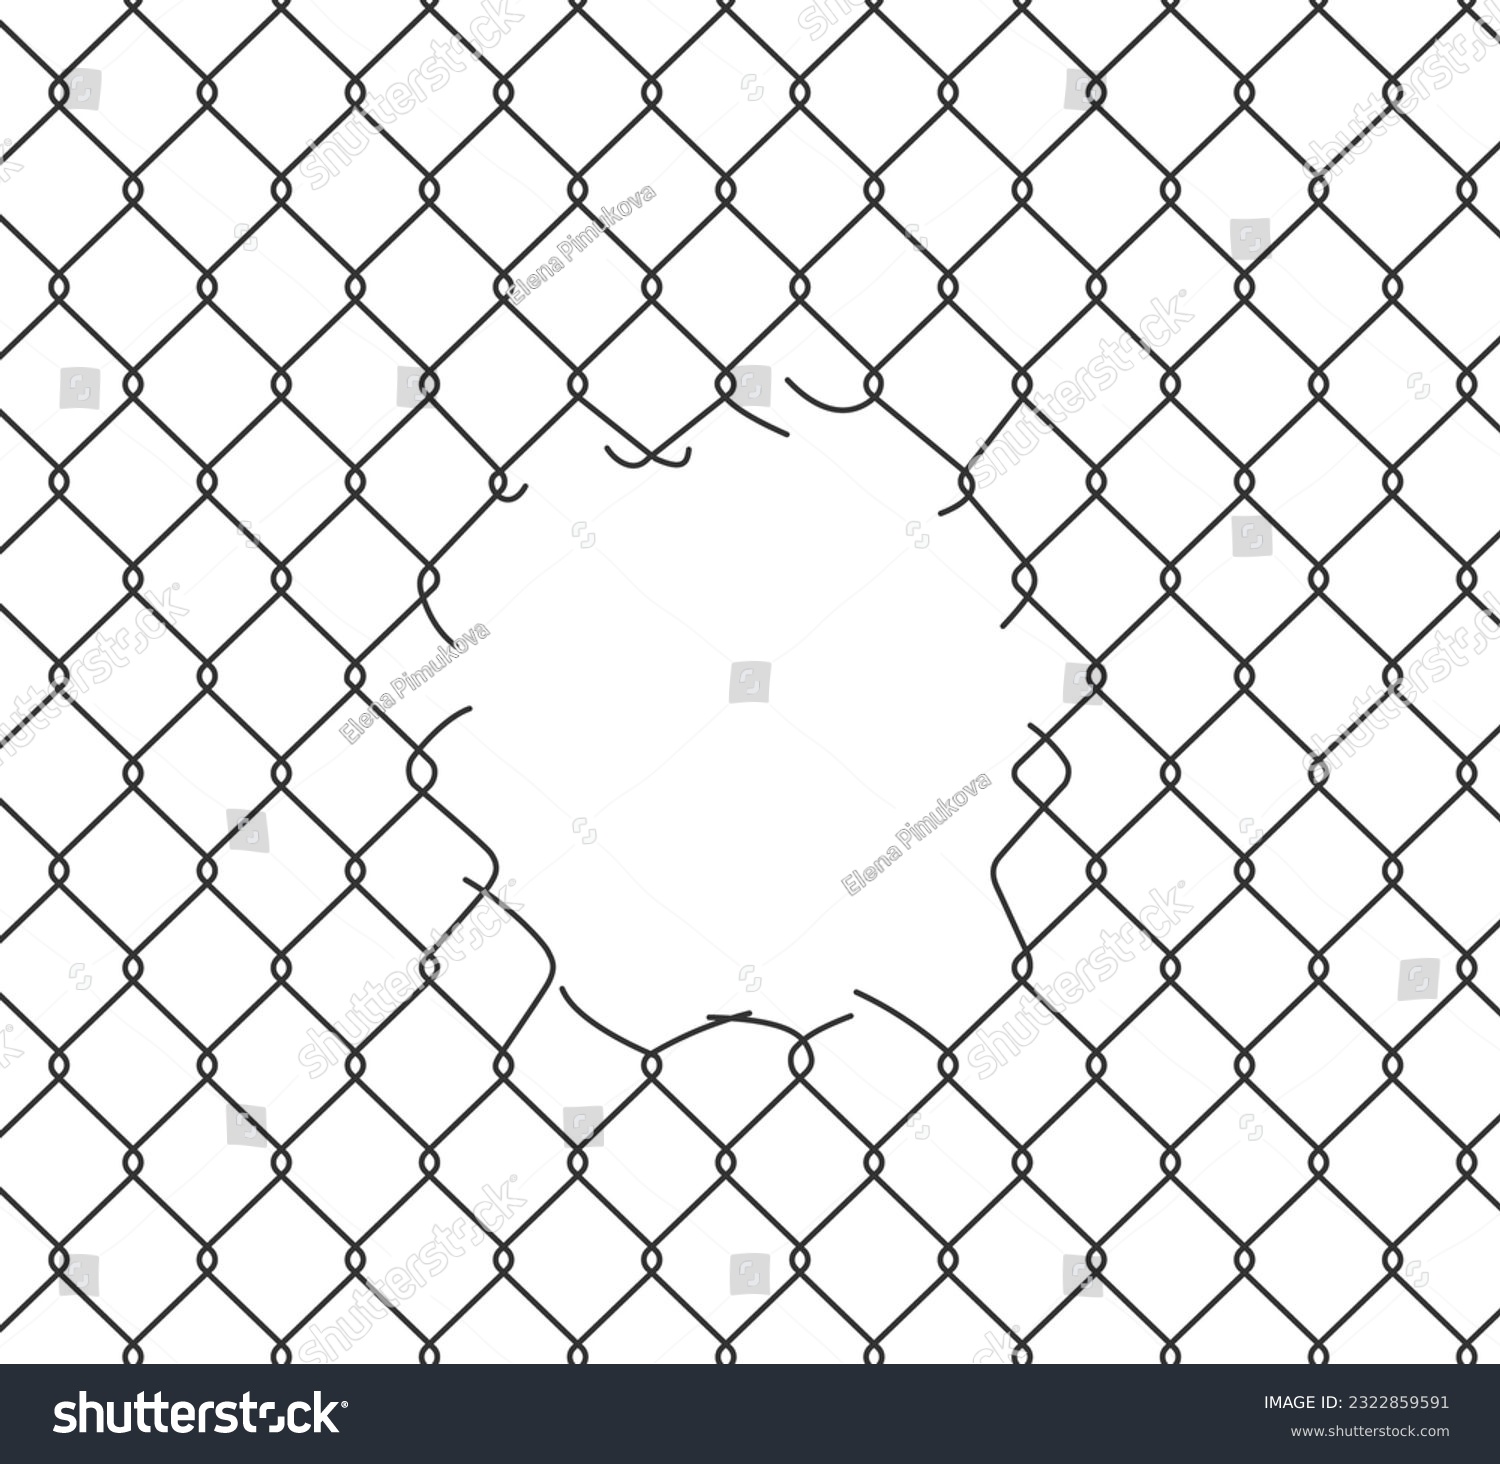 Broken wire mesh fence. Rabitz or chain link fence with cut hole. Torn wire pirson mesh texture. Cut metal lattice grid. Vector illustration isolated on white background. #2322859591